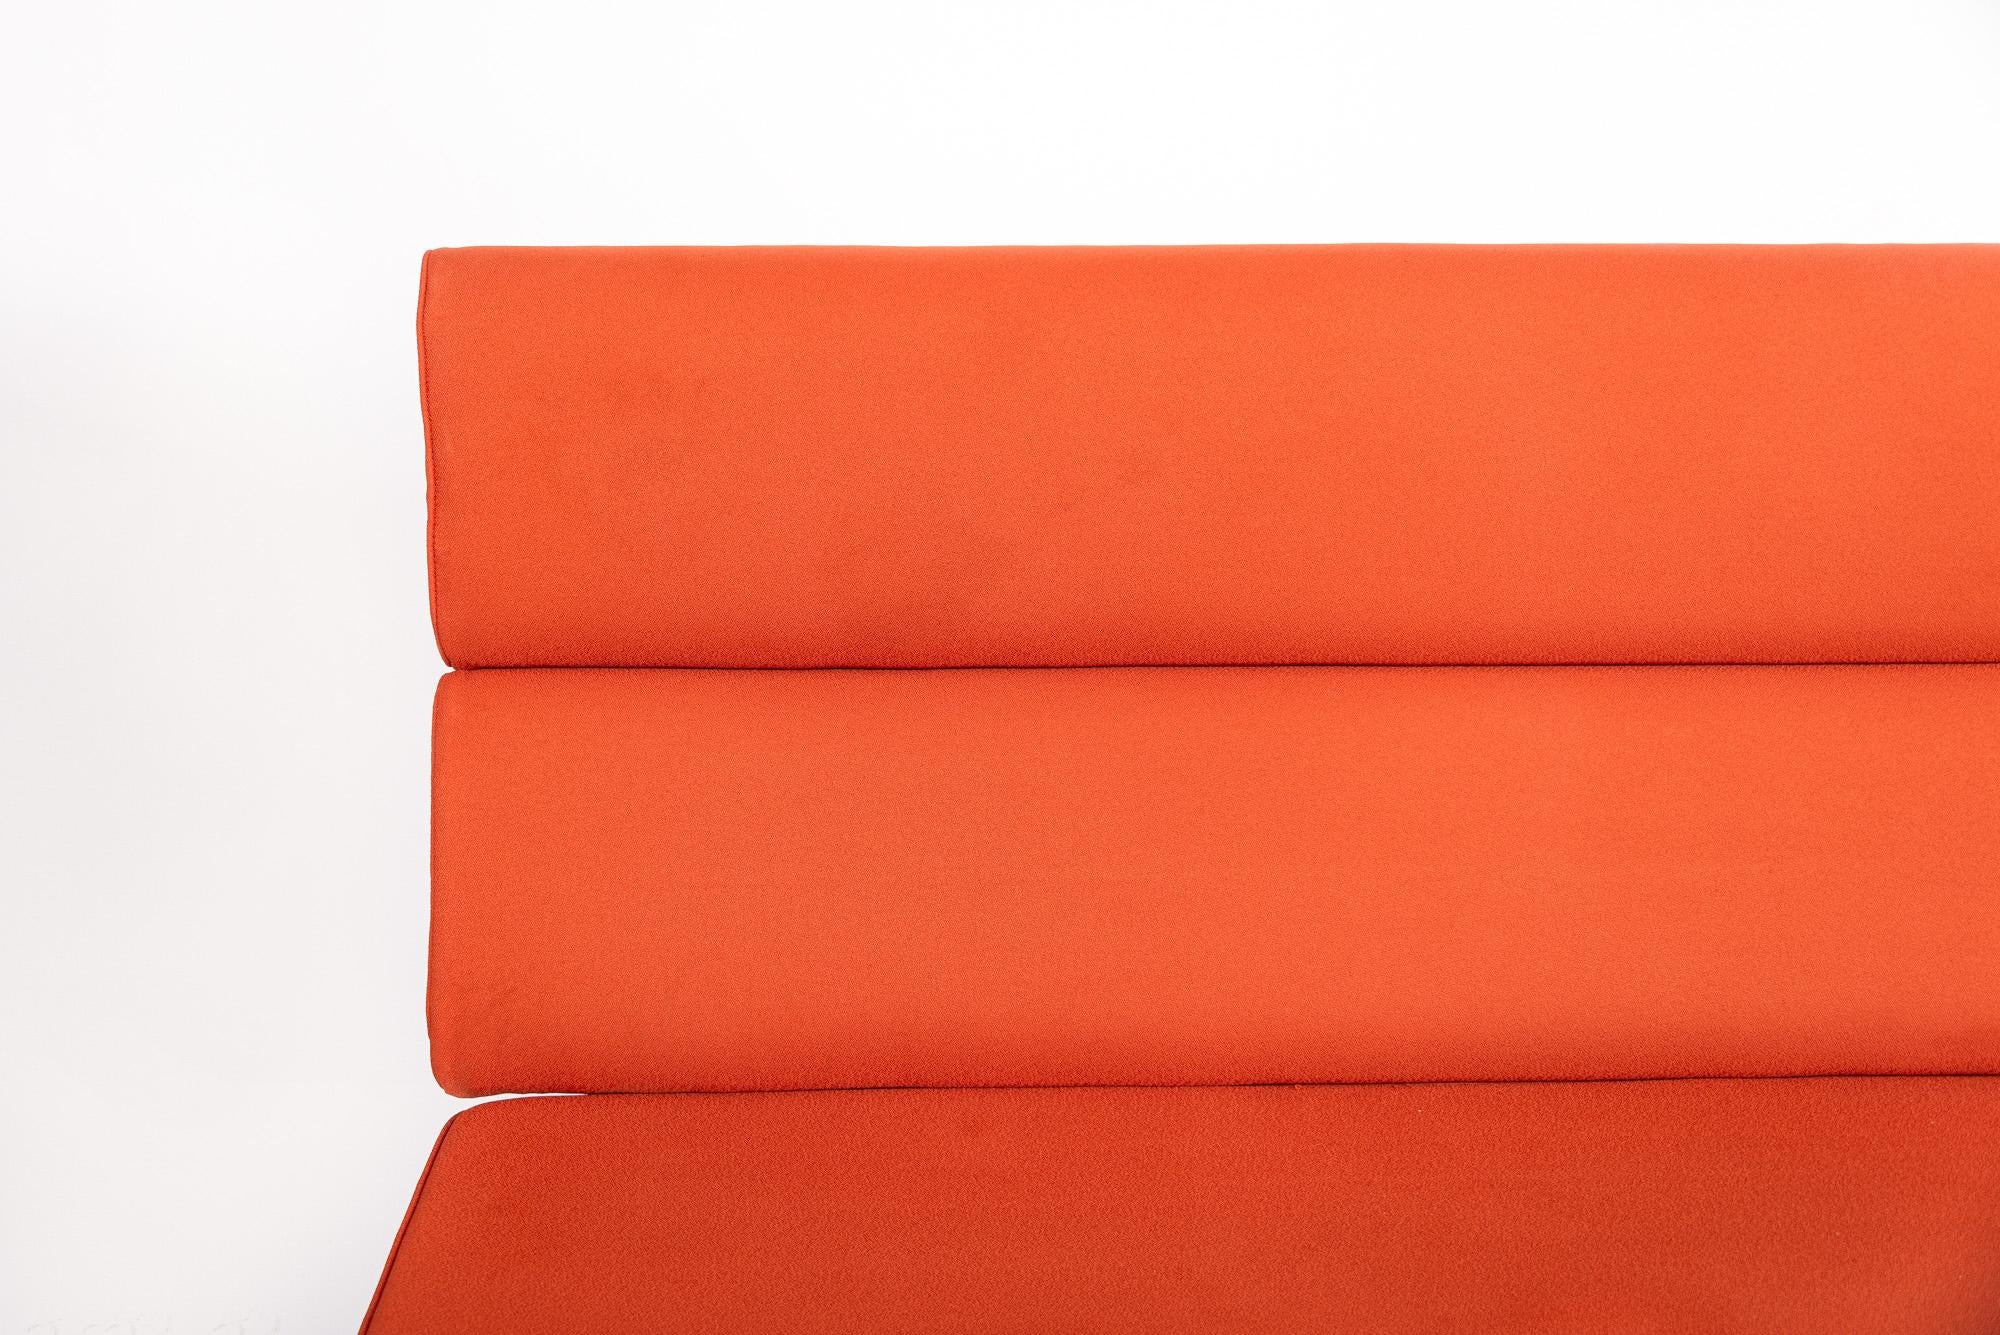 1970s Midcentury Orange Sofa Compact by Charles & Ray Eames for Herman Miller 1